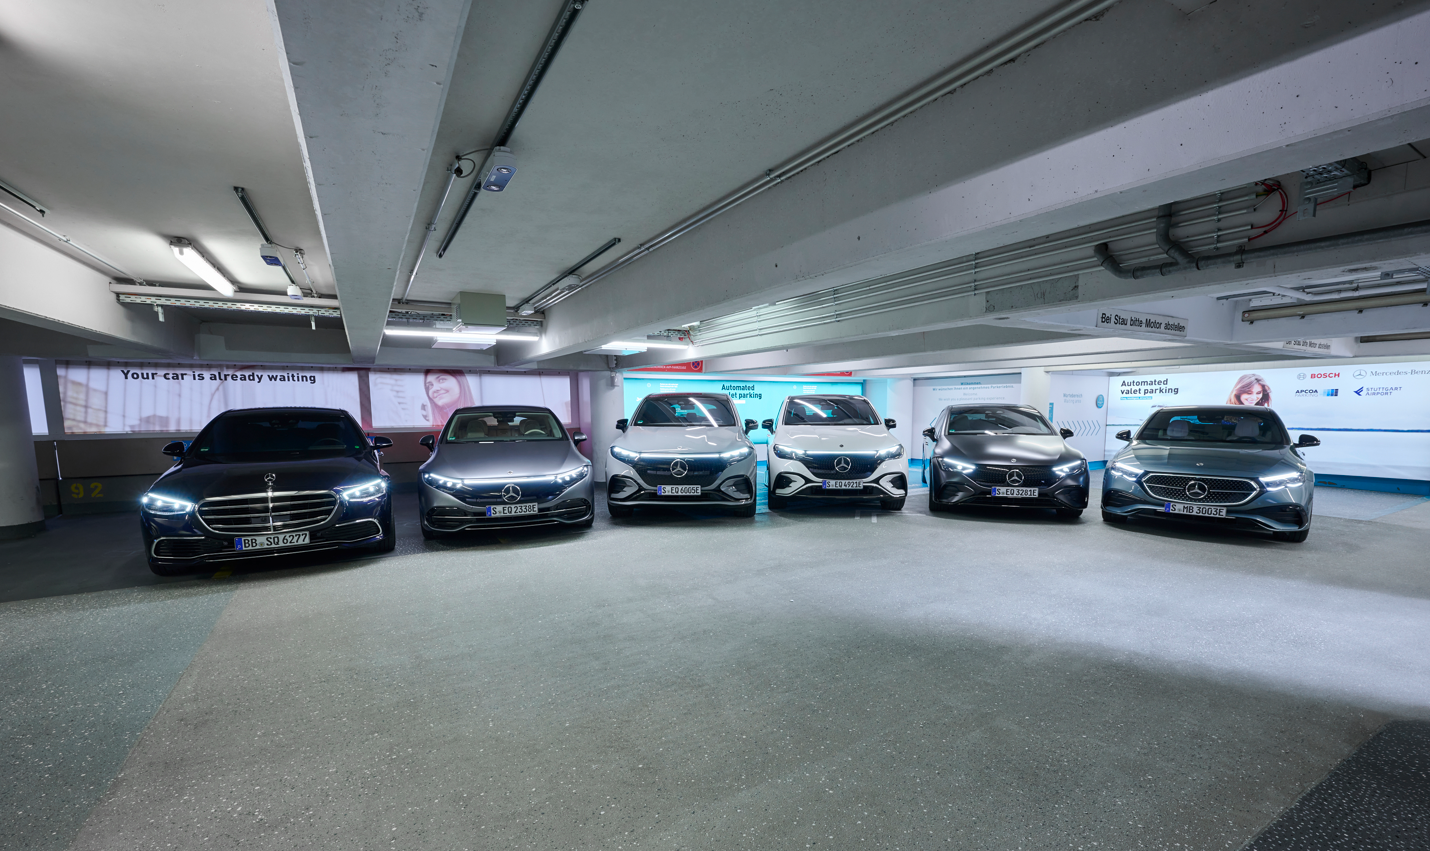 <p>In November 2022, Mercedes-Benz and Bosch received the world’s first approval for commercial use of their highly automated and driverless parking function in Germany.</p>